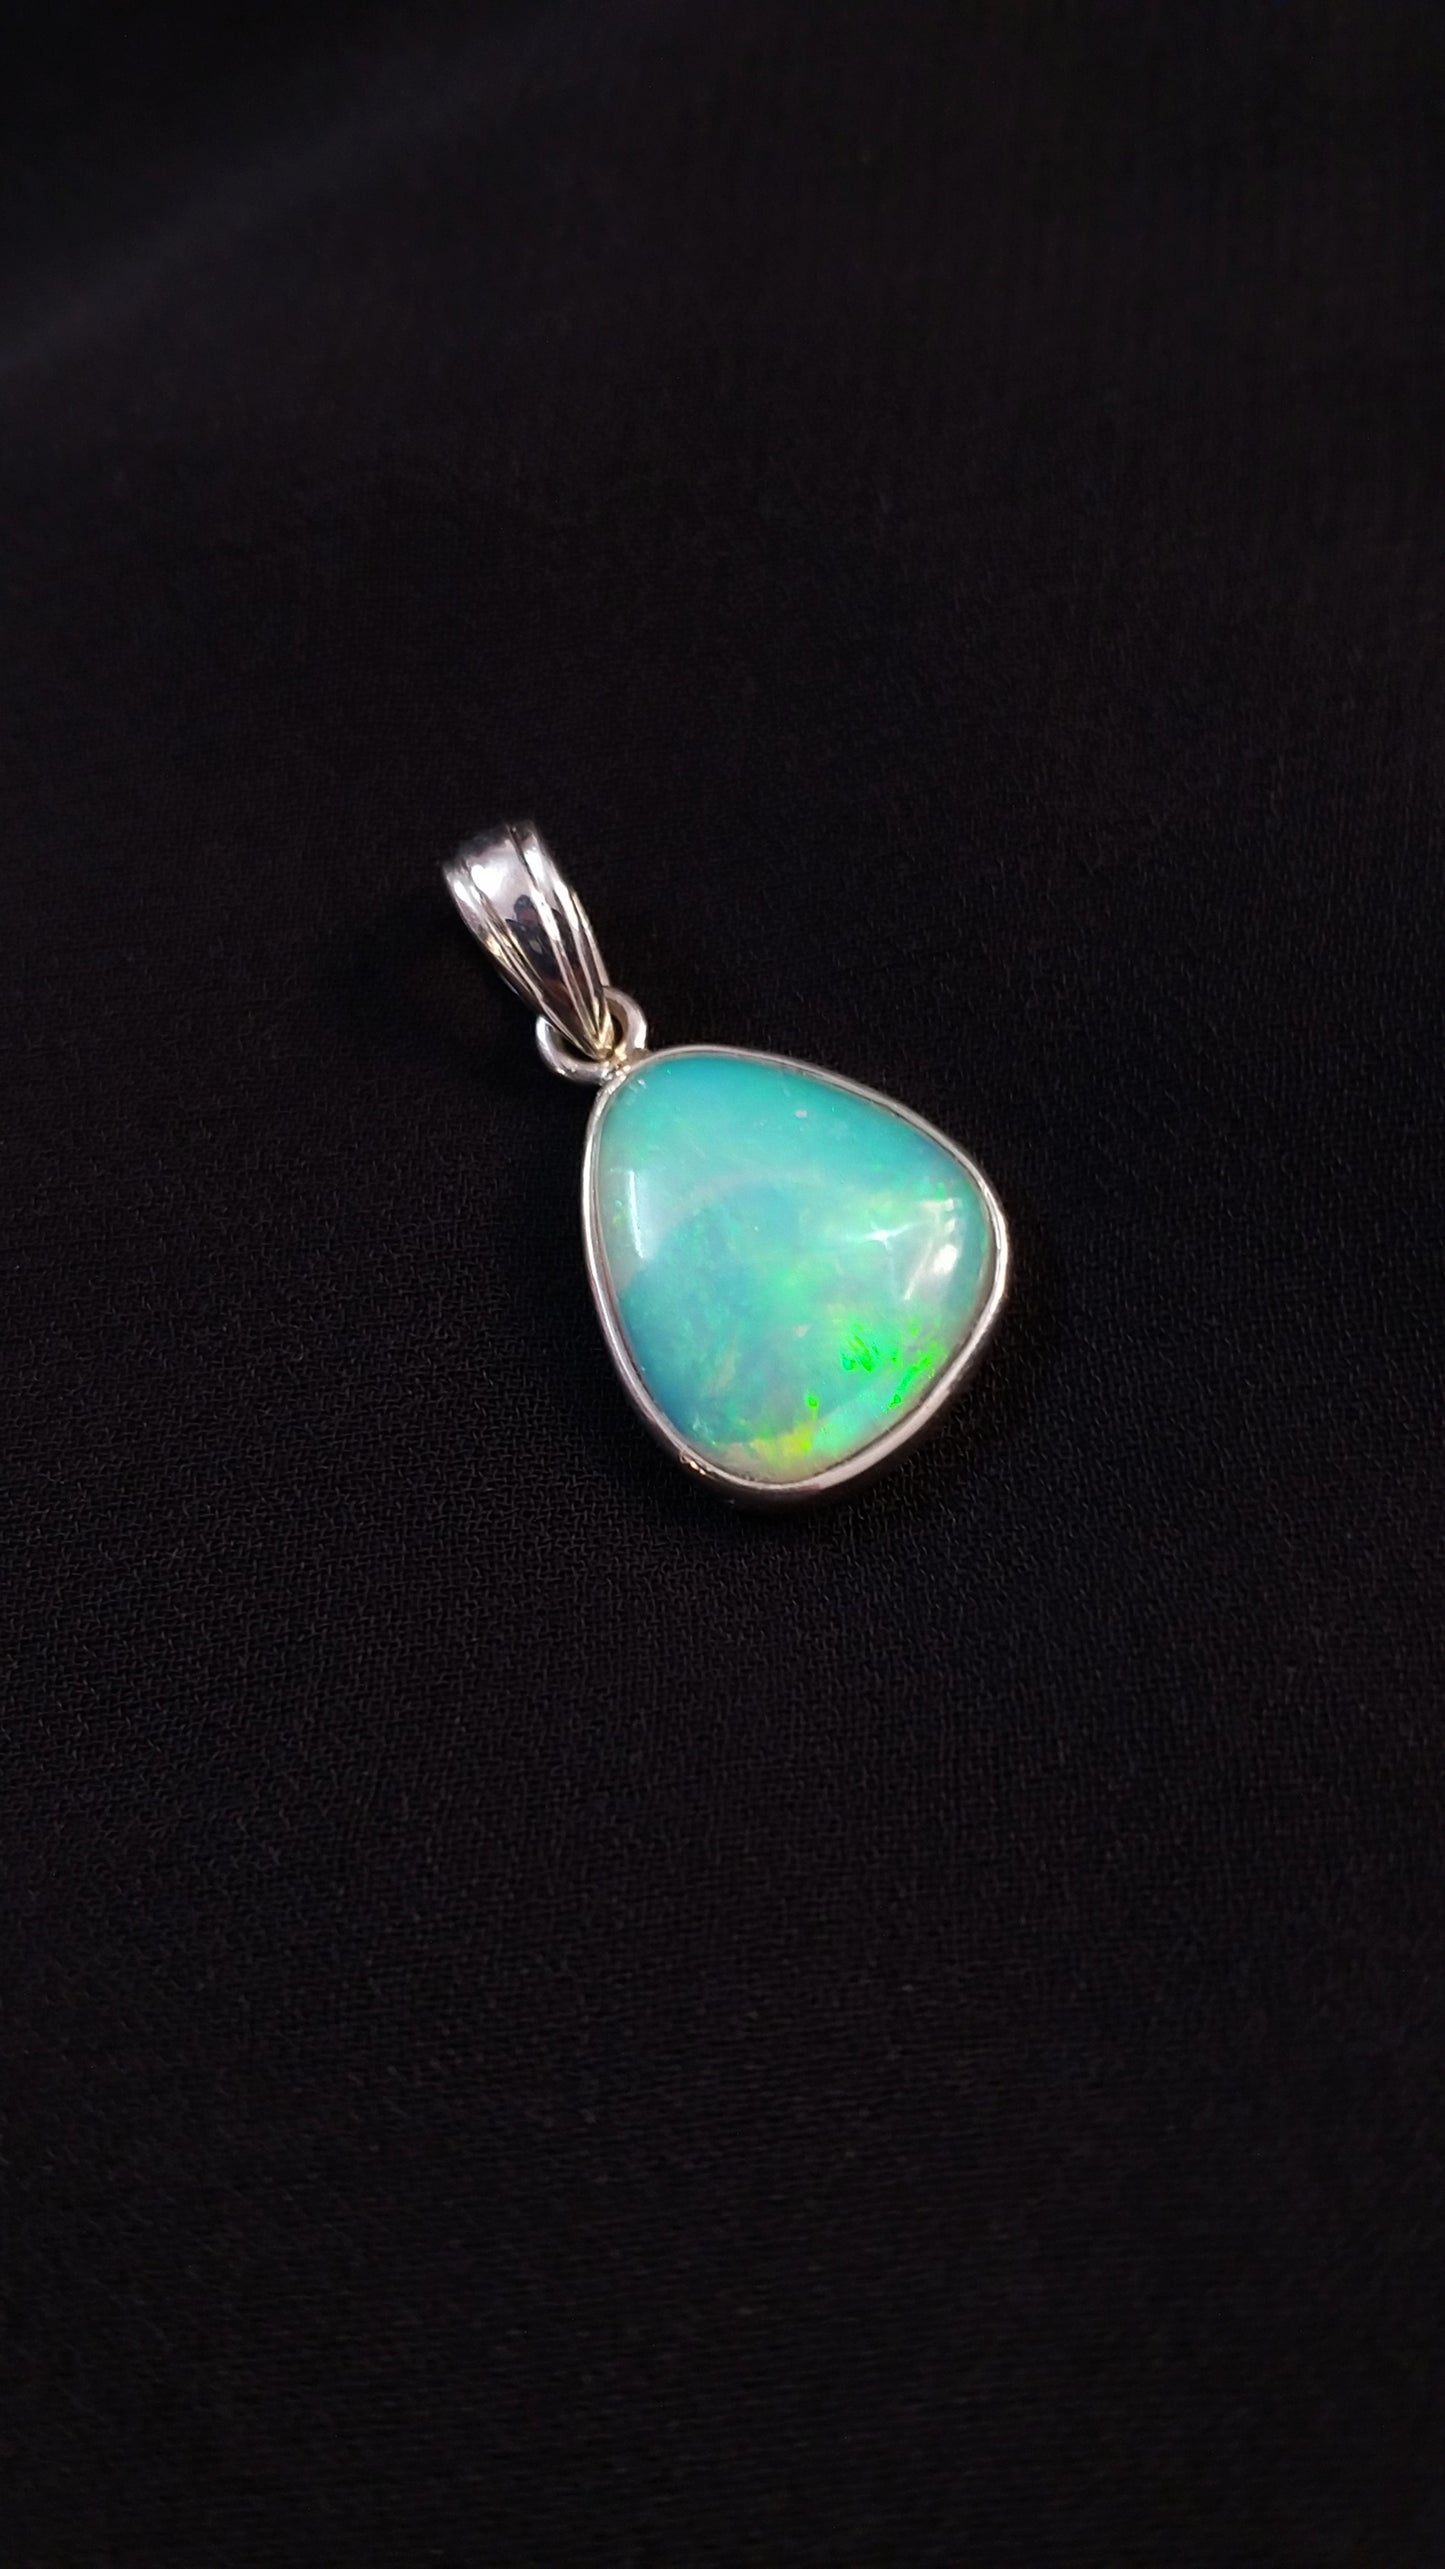 Natural Ethiopian Opal Gemstone Pendant, Dainty Silver Pendant, Fire Opal Jewelry Gift for Her